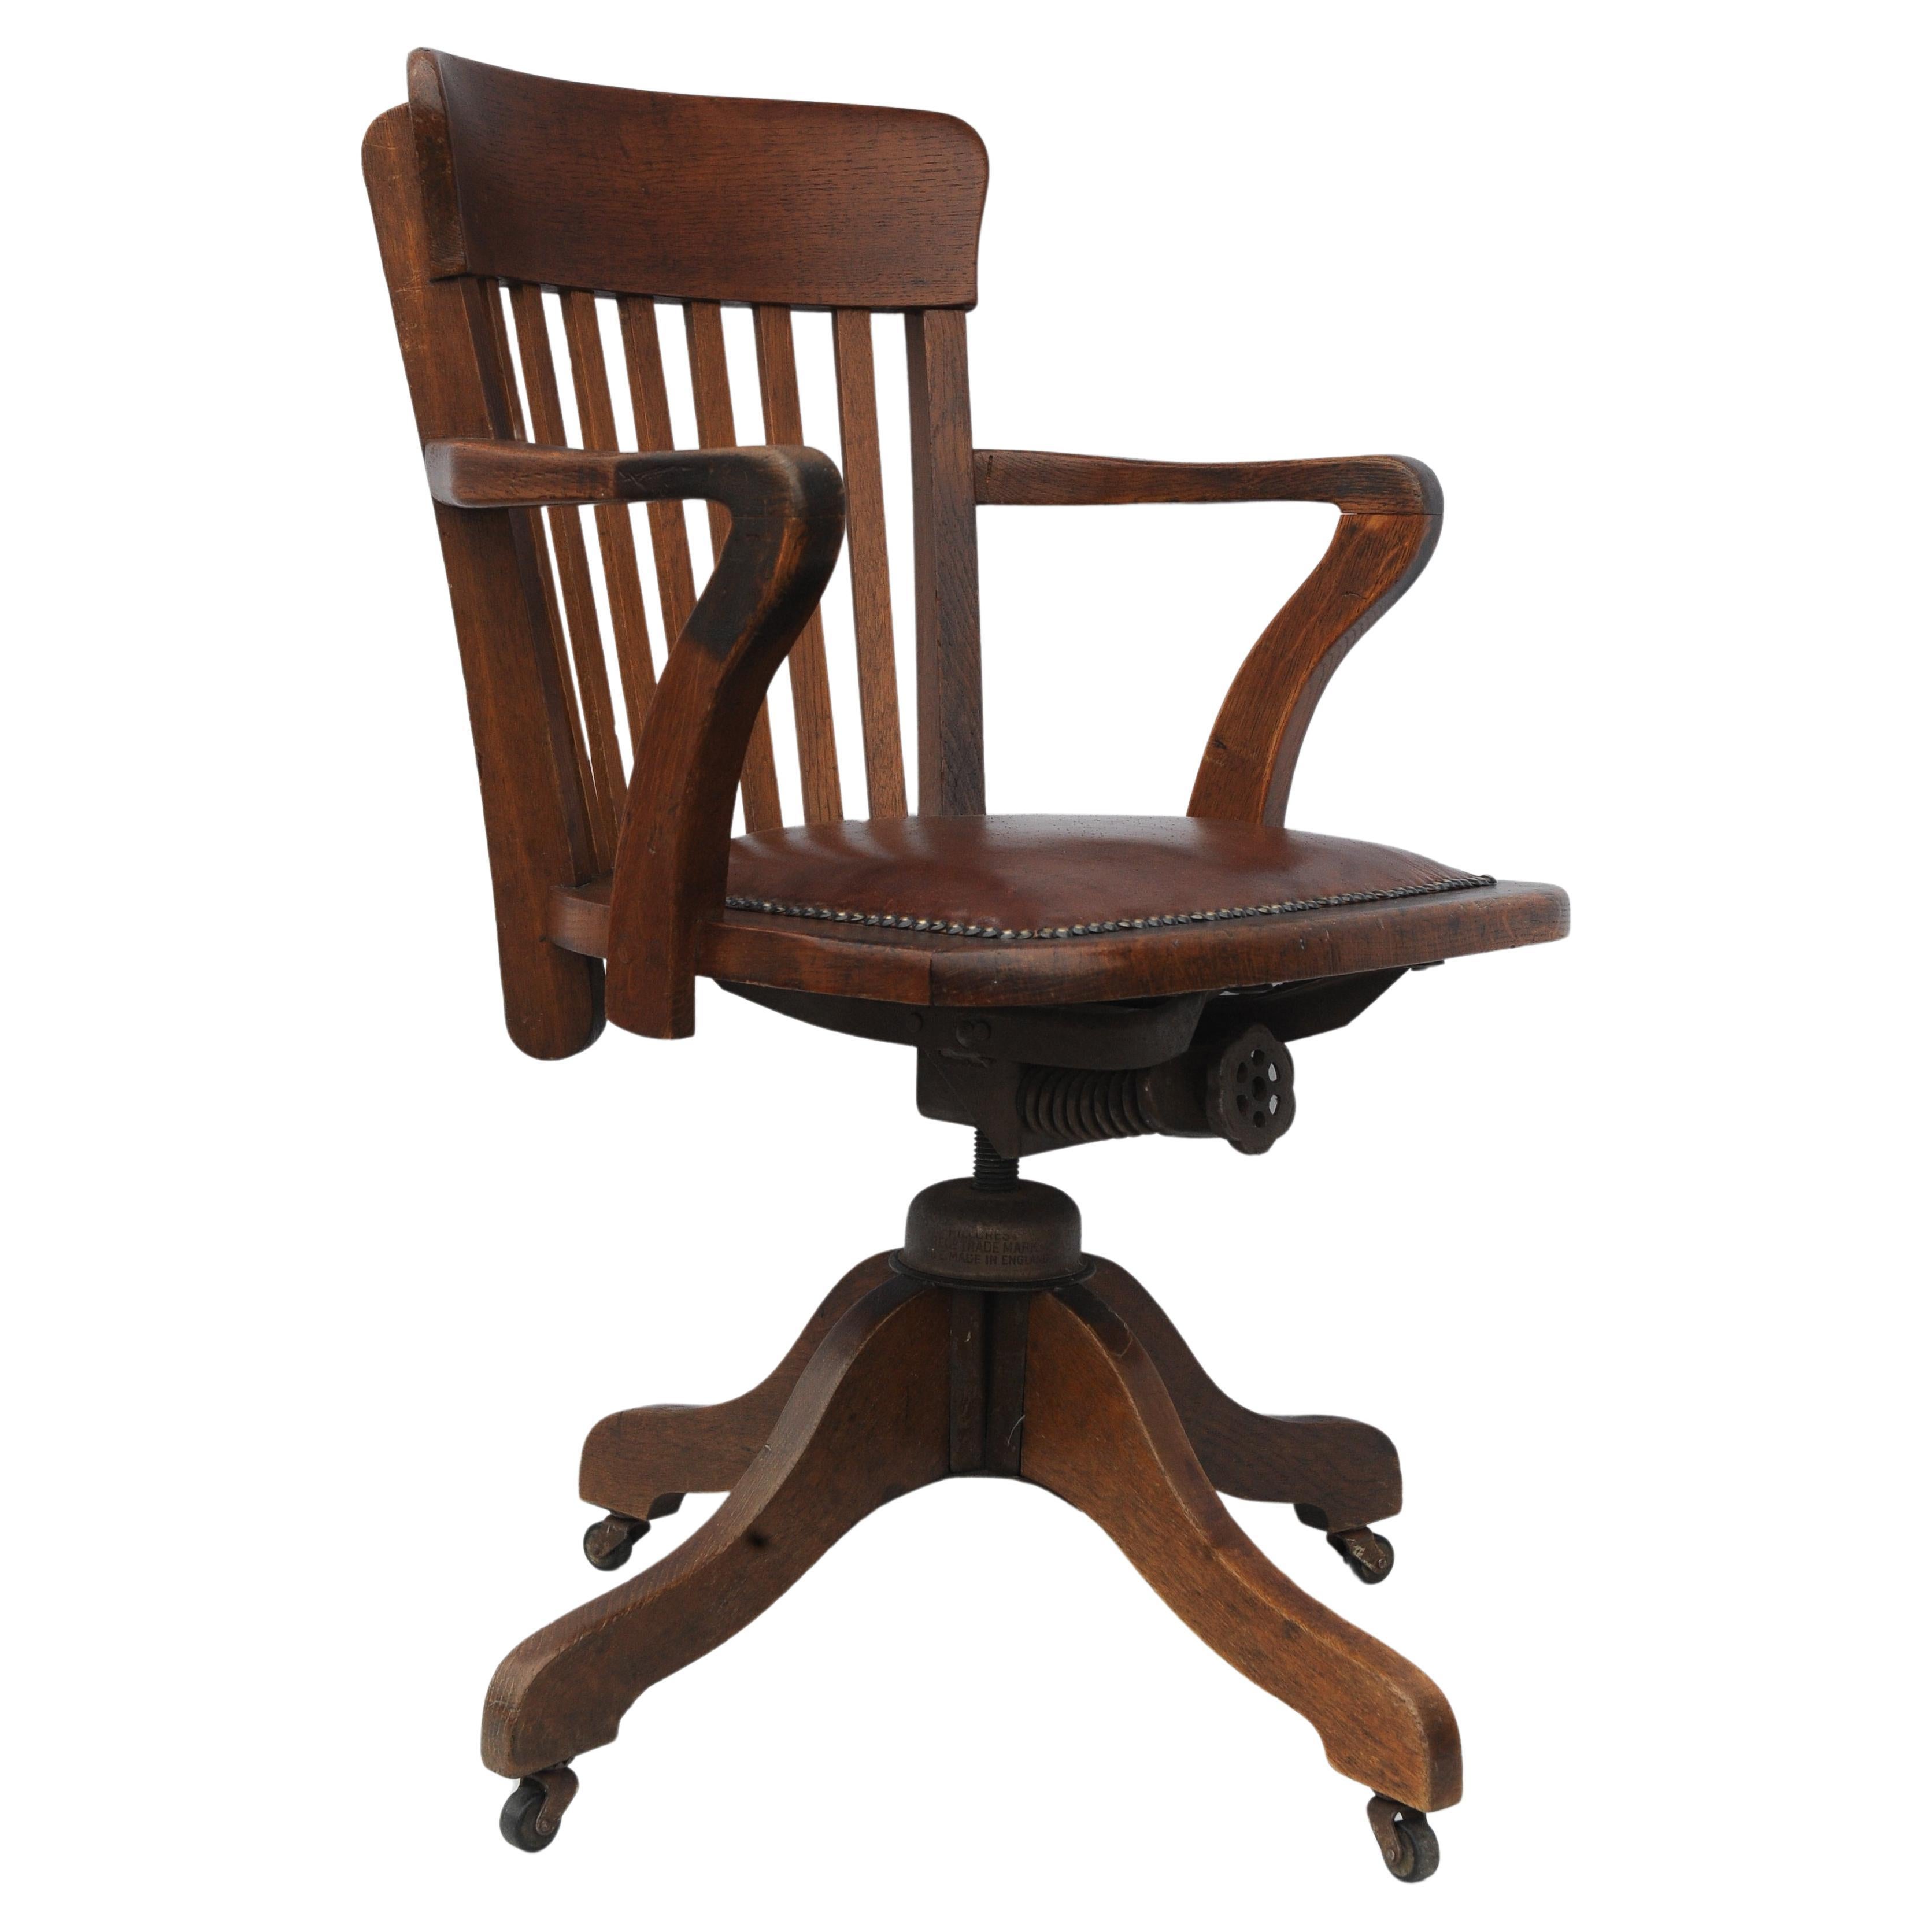 Early 20th Century Hillcrest Oak Rail Revolving Desk Chair With Polished Brown Leather Seat Finished With Brass Studs 

British Made by esteemed chair brand Hillcrest 

Height to arms 68cm
Width of seat 44cm
Depth of seat 44cm
Height to seat 49cm
